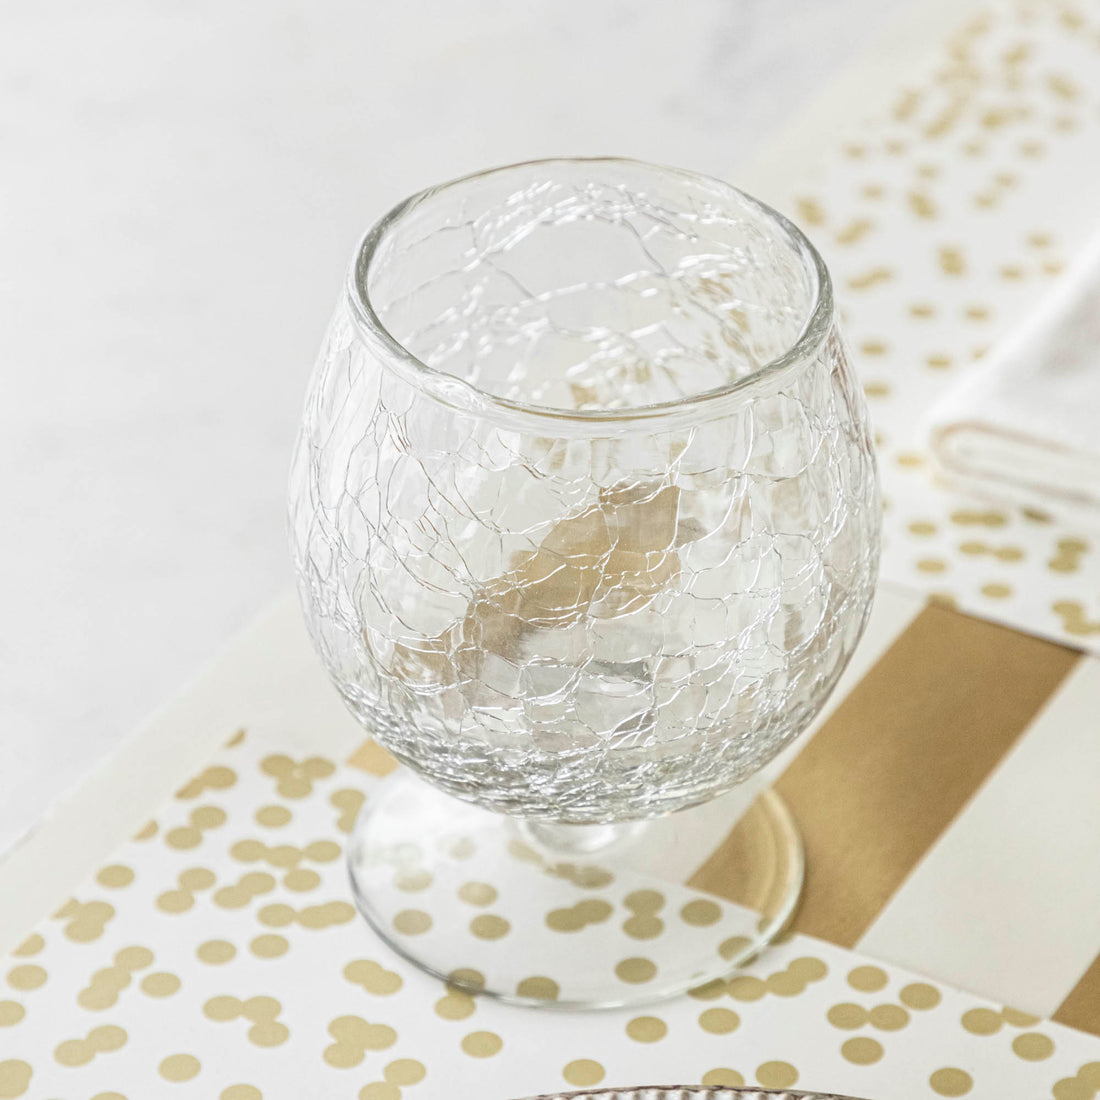 A glass of wine on a table next to Norwell Goblets by Design Ideas.